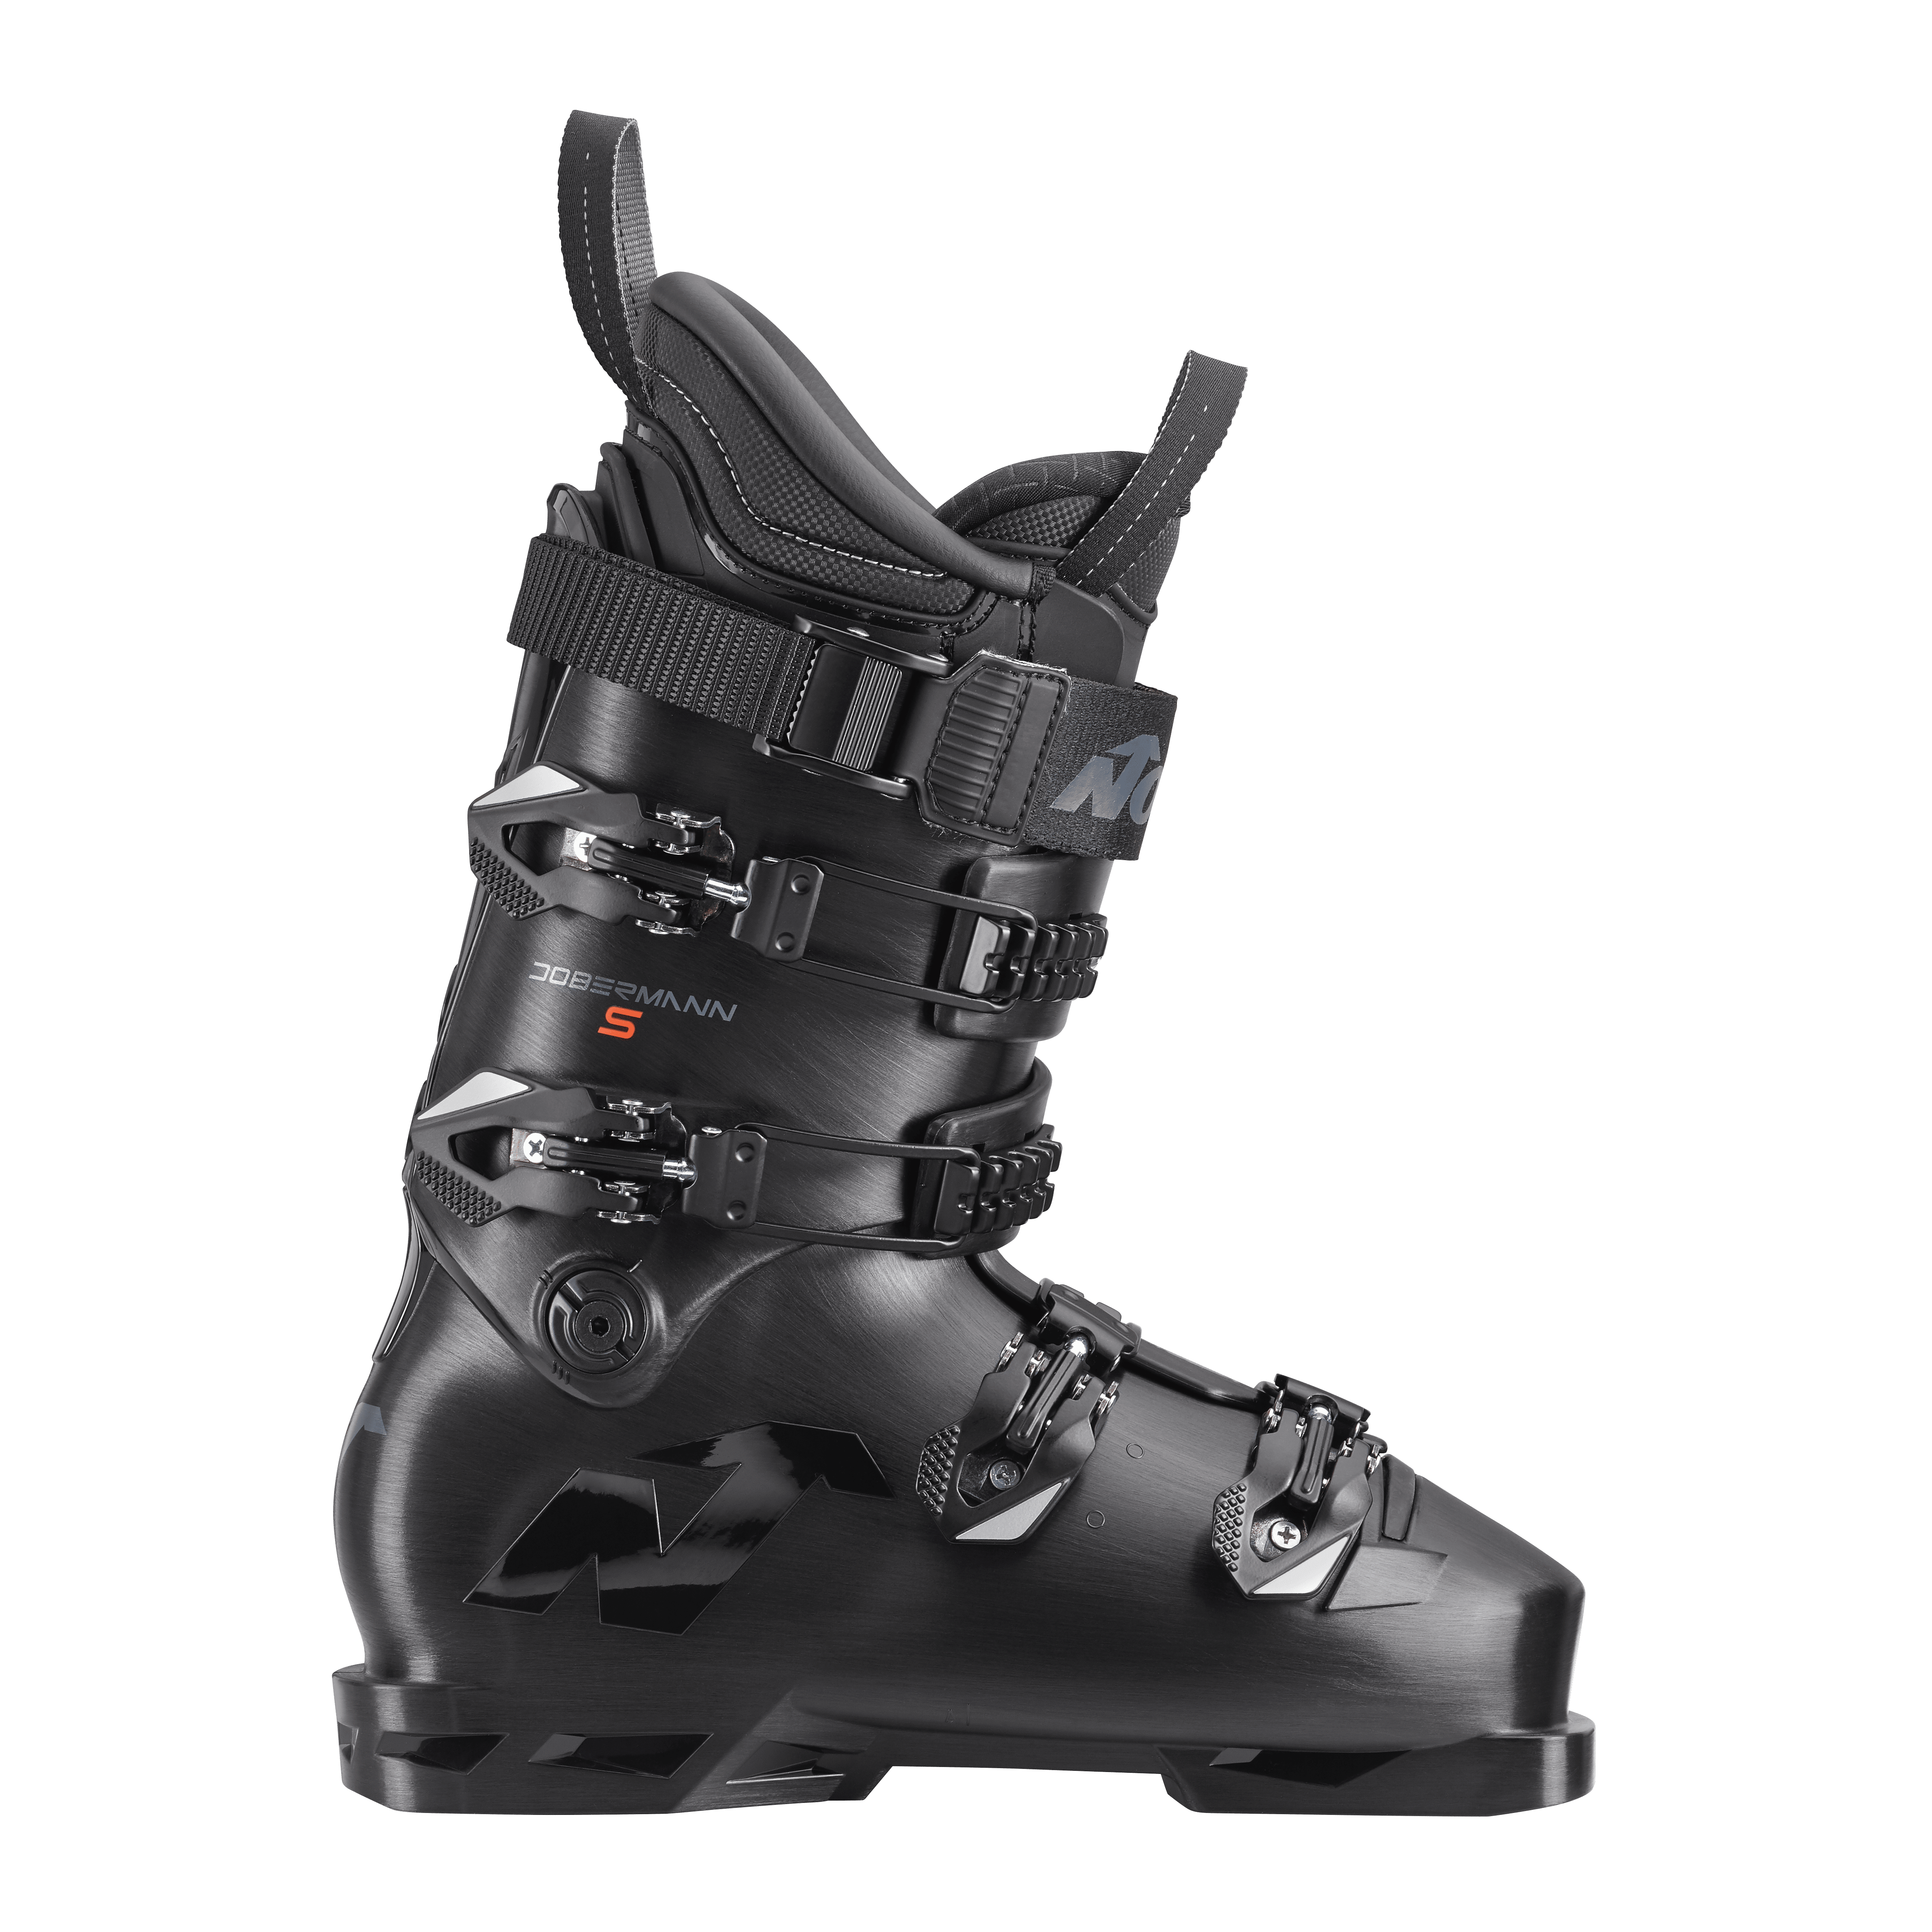 Dobermann 5 S - Nordica - Skis and Boots – Official website